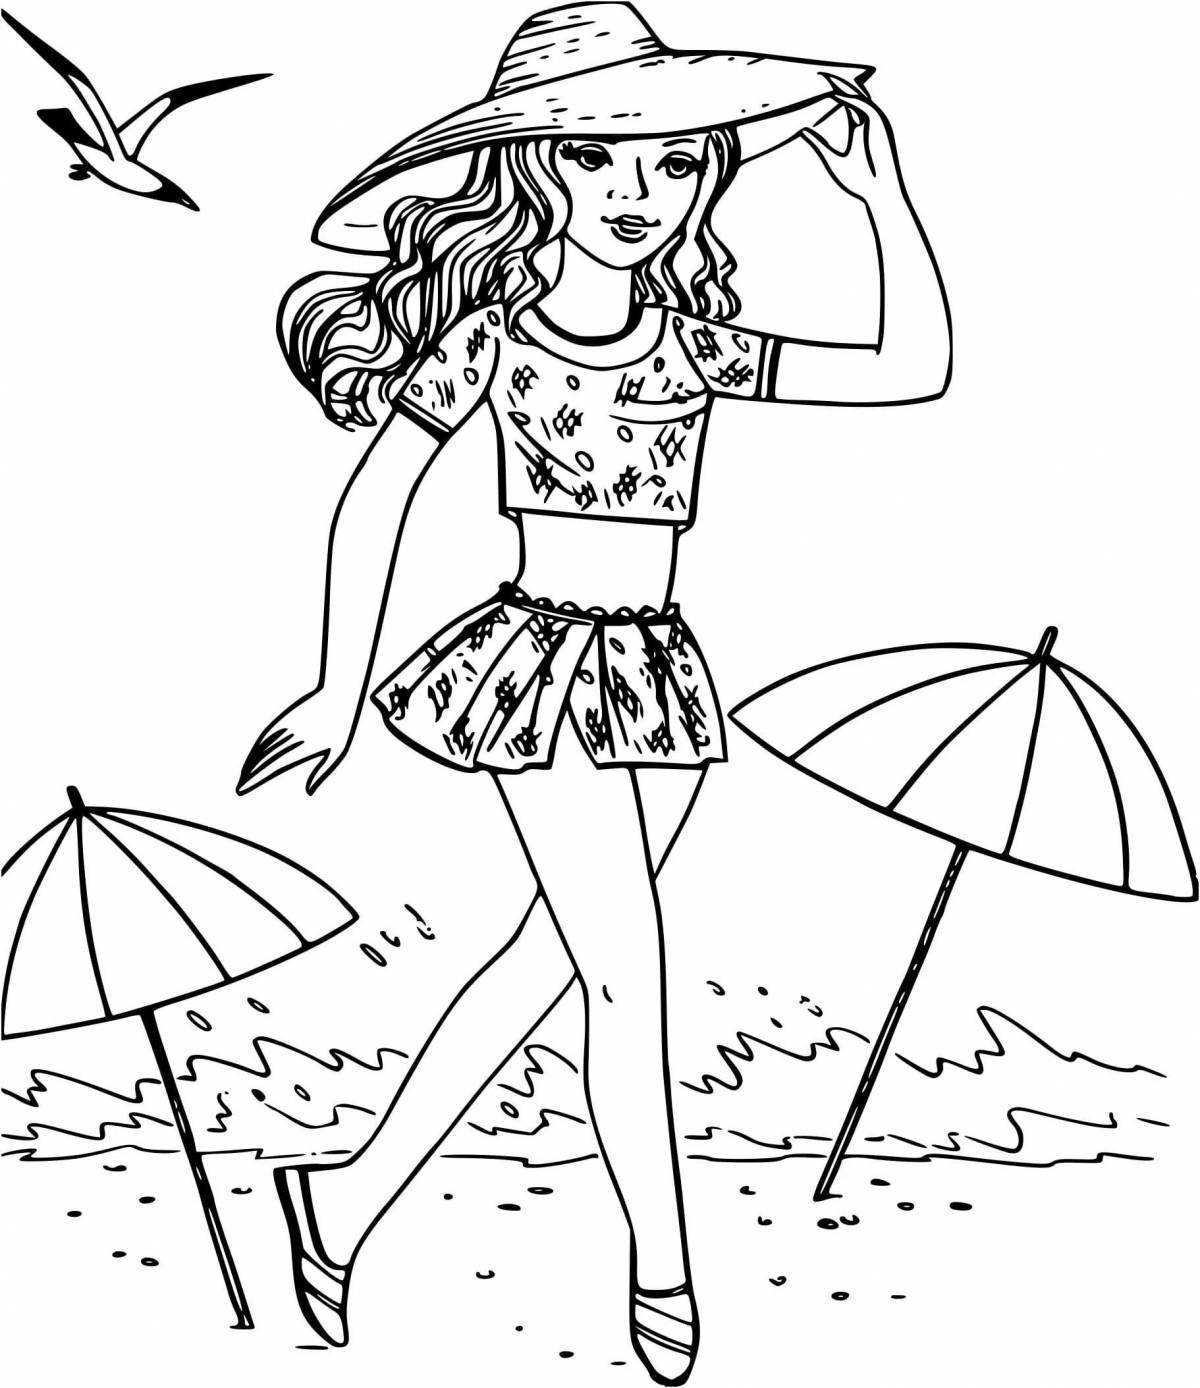 Fun coloring pages for 12 year olds